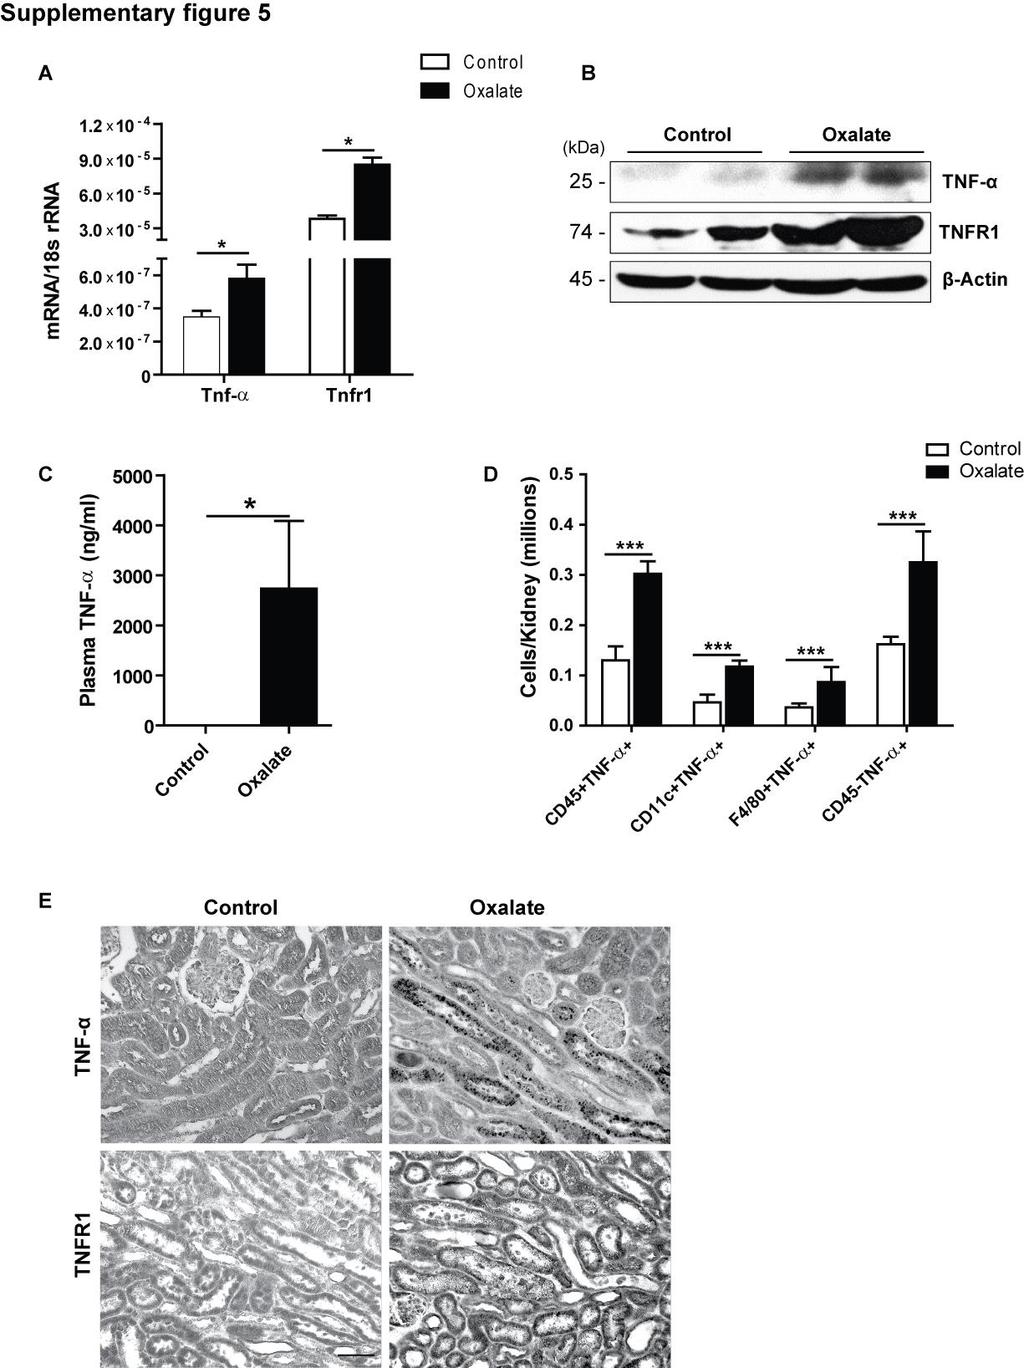 Supplementary fig. 5. Expression of TNF and TNF receptors in murine kidneys during acute oxalate nephropathy.